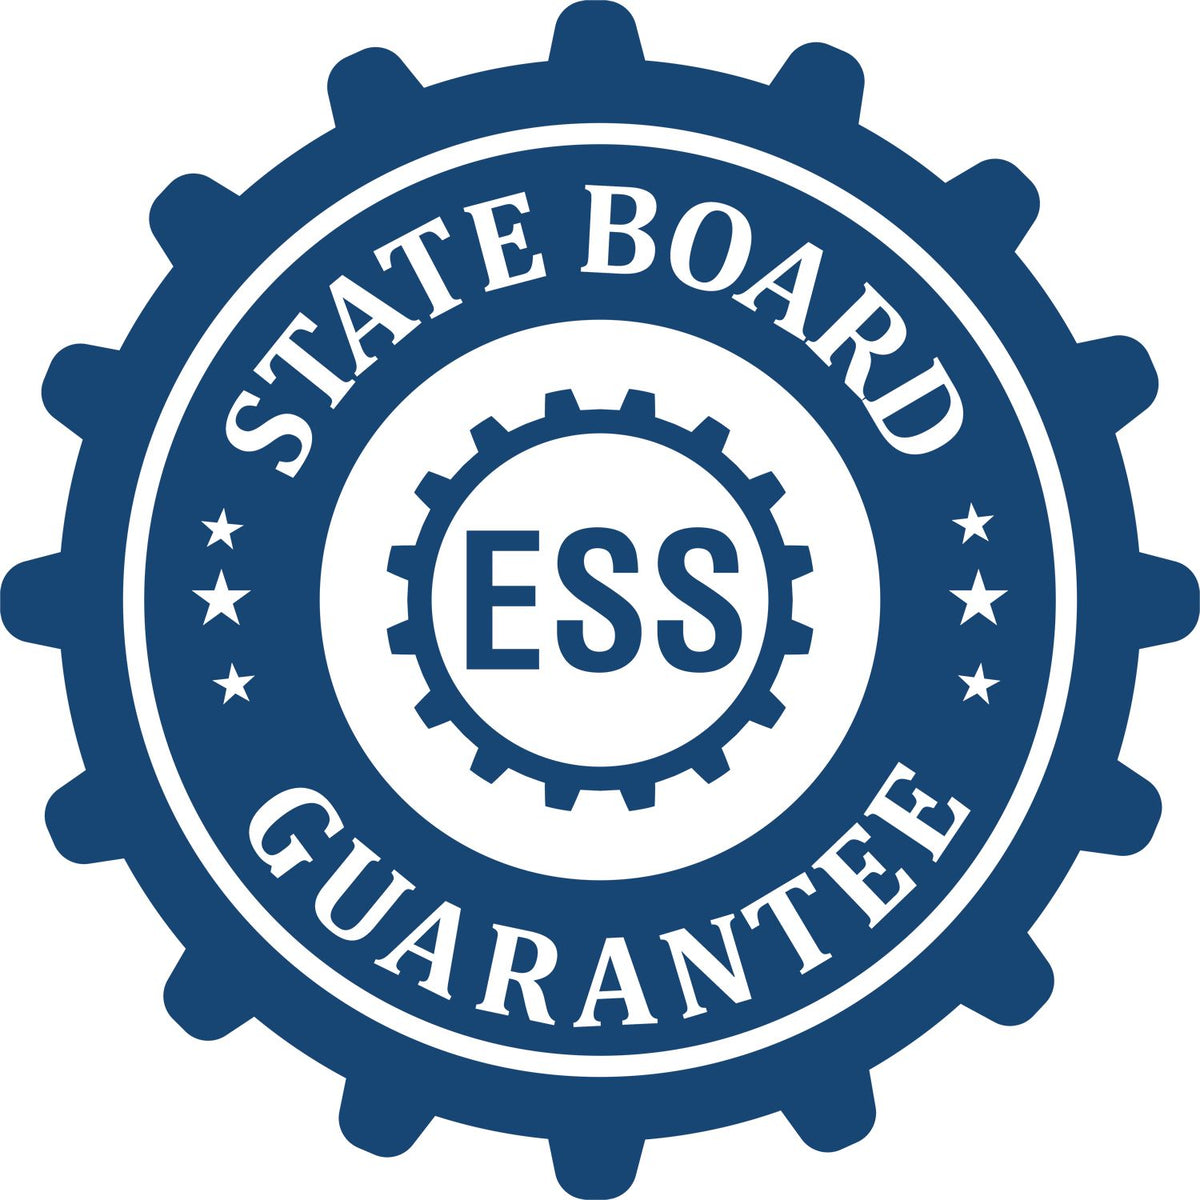 An emblem in a gear shape illustrating a state board guarantee for the Hybrid Massachusetts Geologist Seal